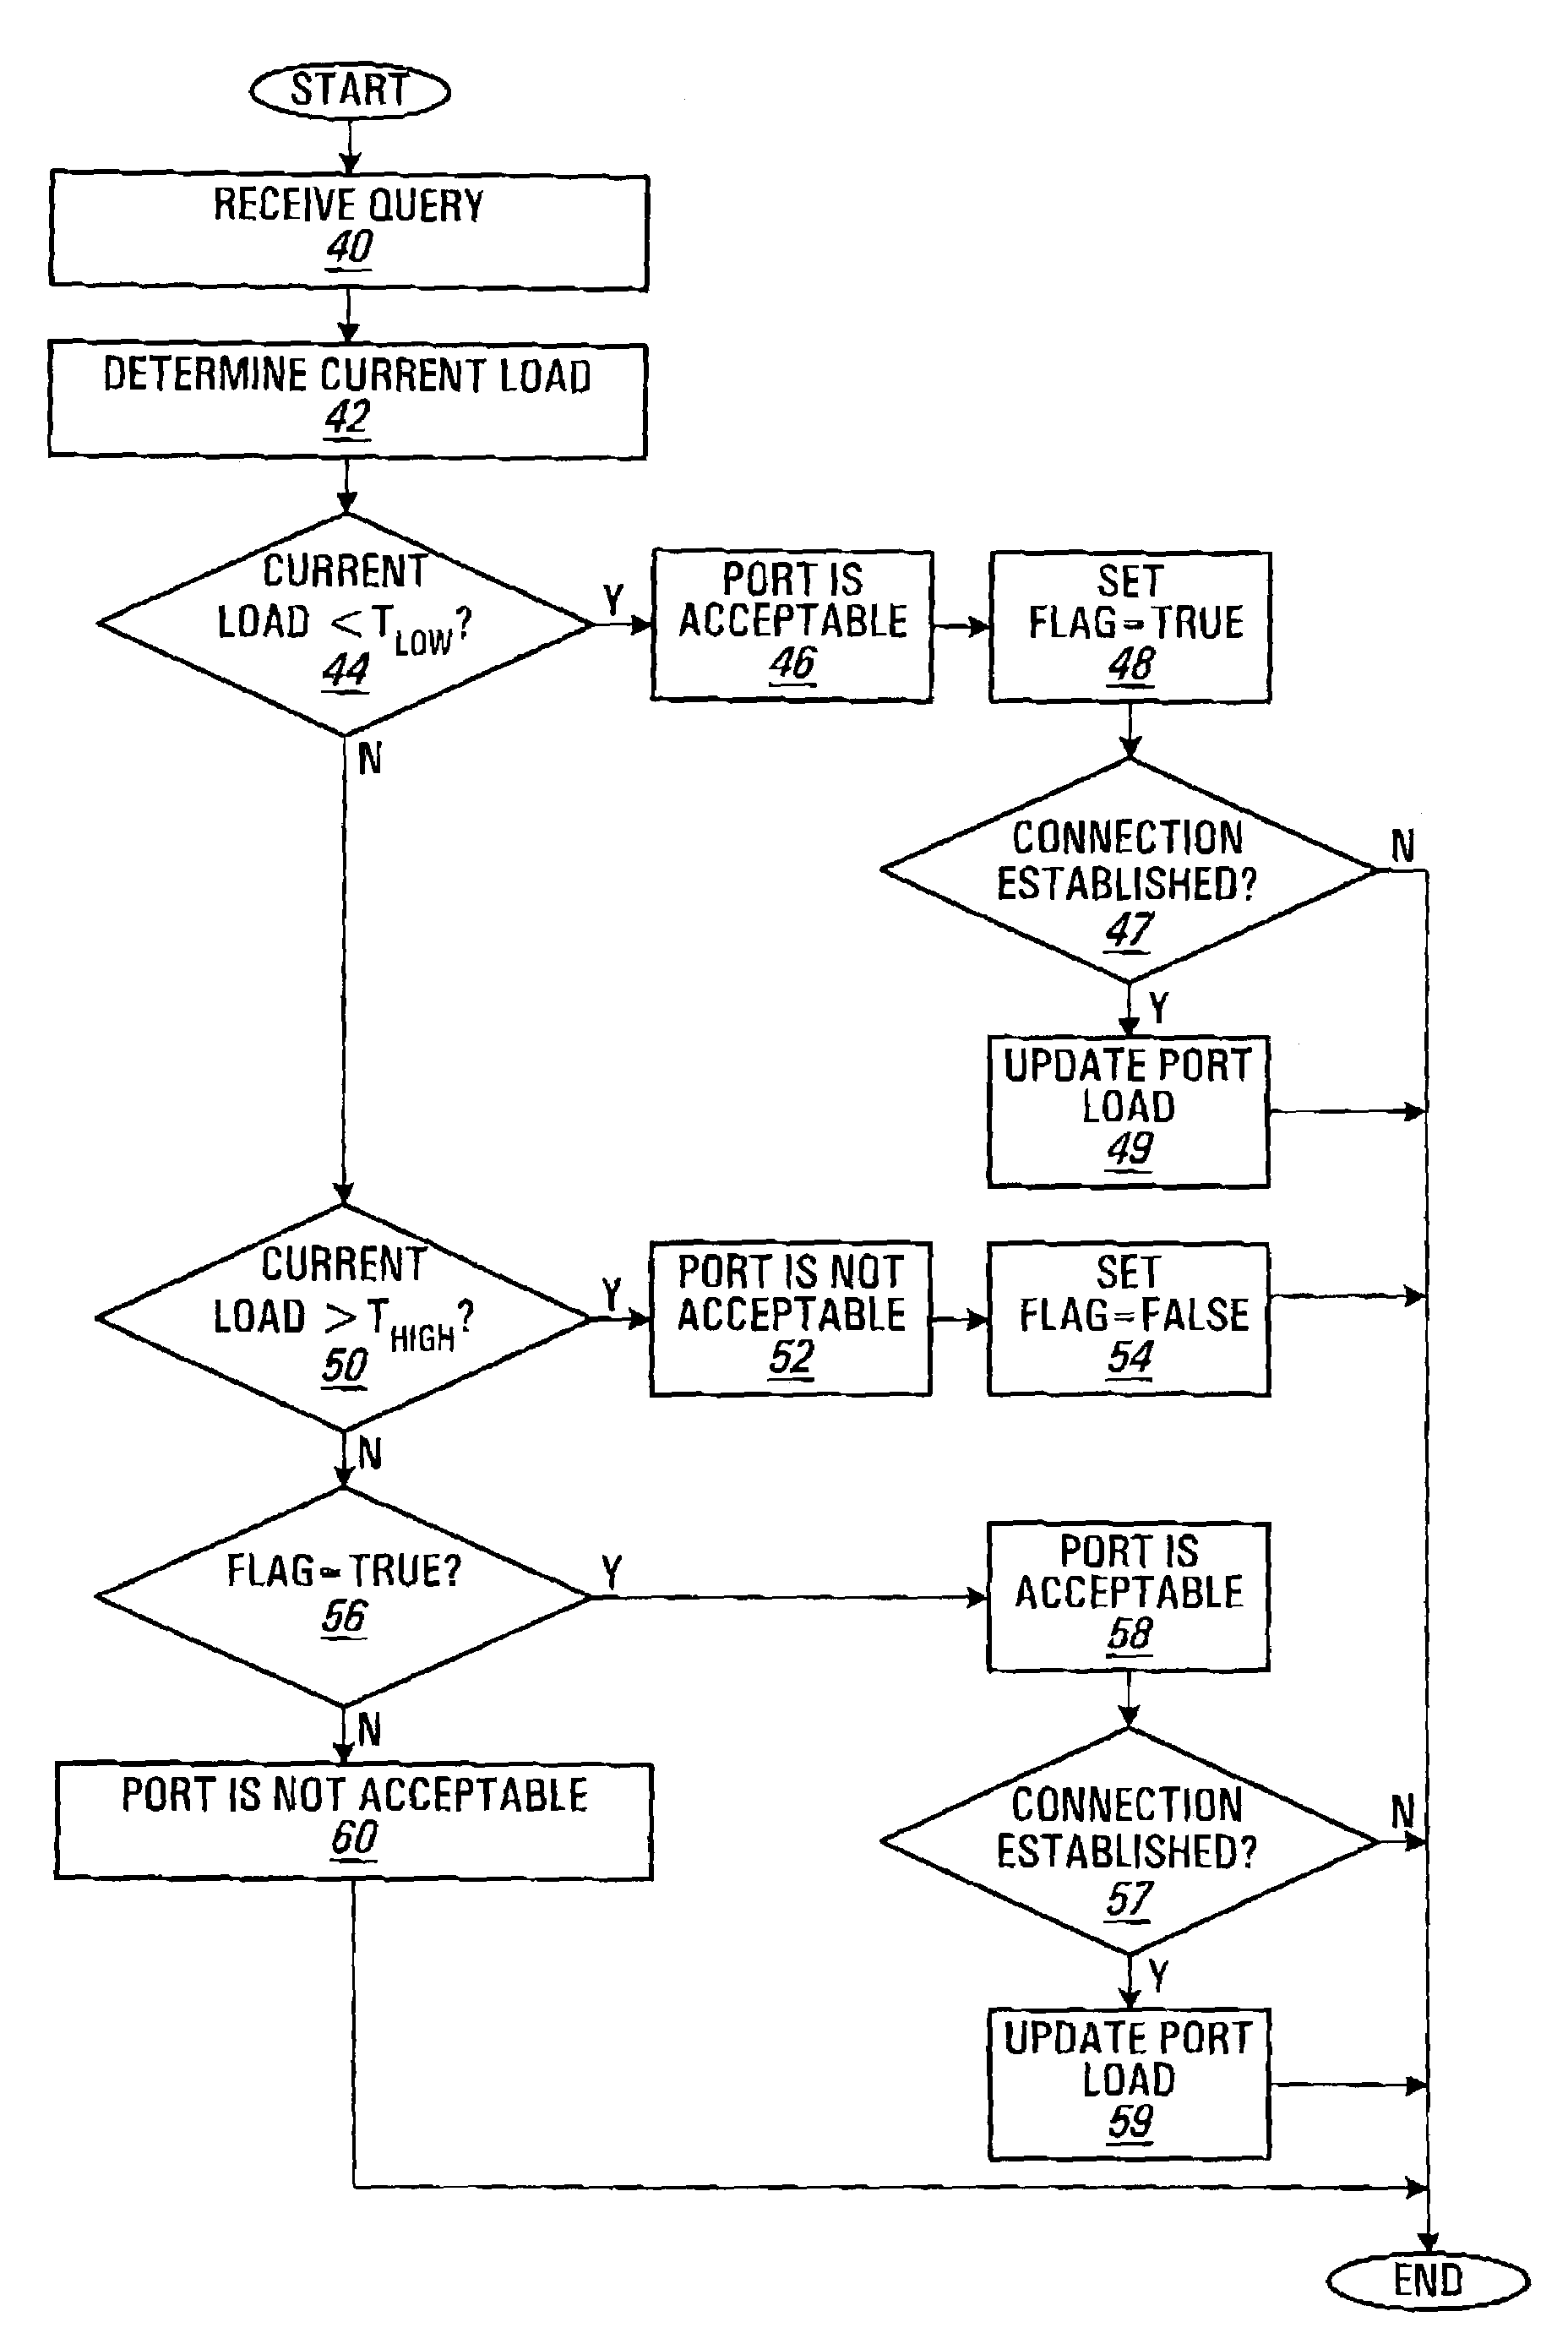 Control plane architecture for automatically switched optical network